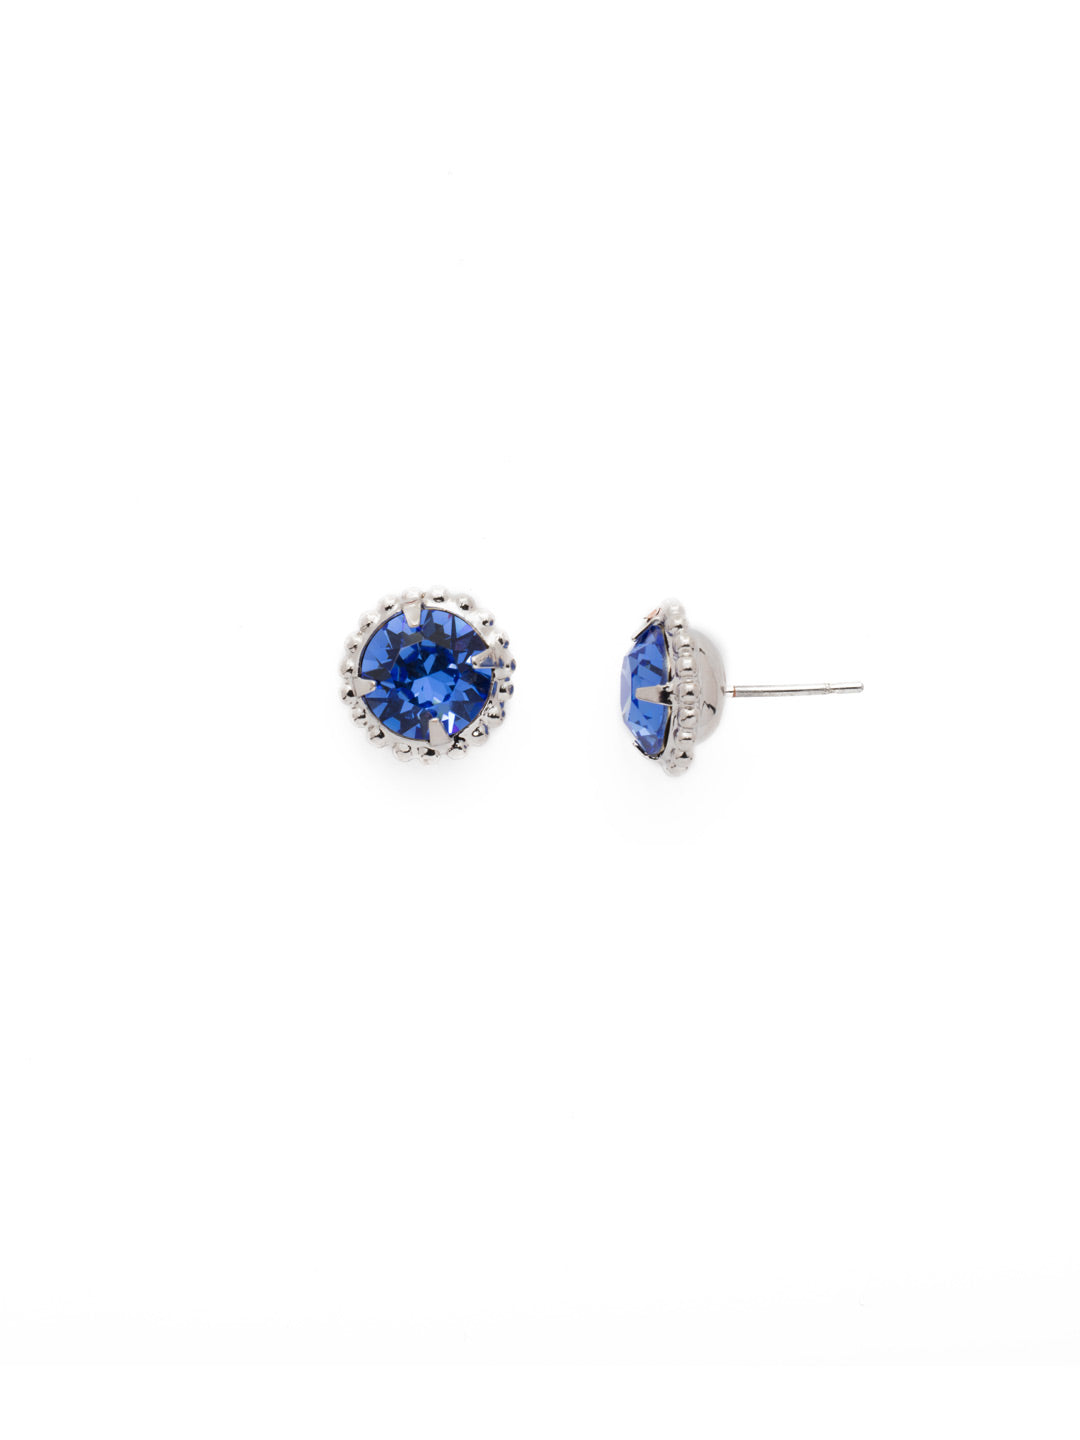 Simplicity Stud Earrings - EBY38RHSAP - <p>A timeless classic, the Simplicity Stud Earrings feature round cut crystals in a variety of colors; accented with a halo of metal beaded detail. Need help picking a stud? <a href="https://www.sorrelli.com/blogs/sisterhood/round-stud-earrings-101-a-rundown-of-sizes-styles-and-sparkle">Check out our size guide!</a> From Sorrelli's Sapphire collection in our Palladium Silver-tone finish.</p>